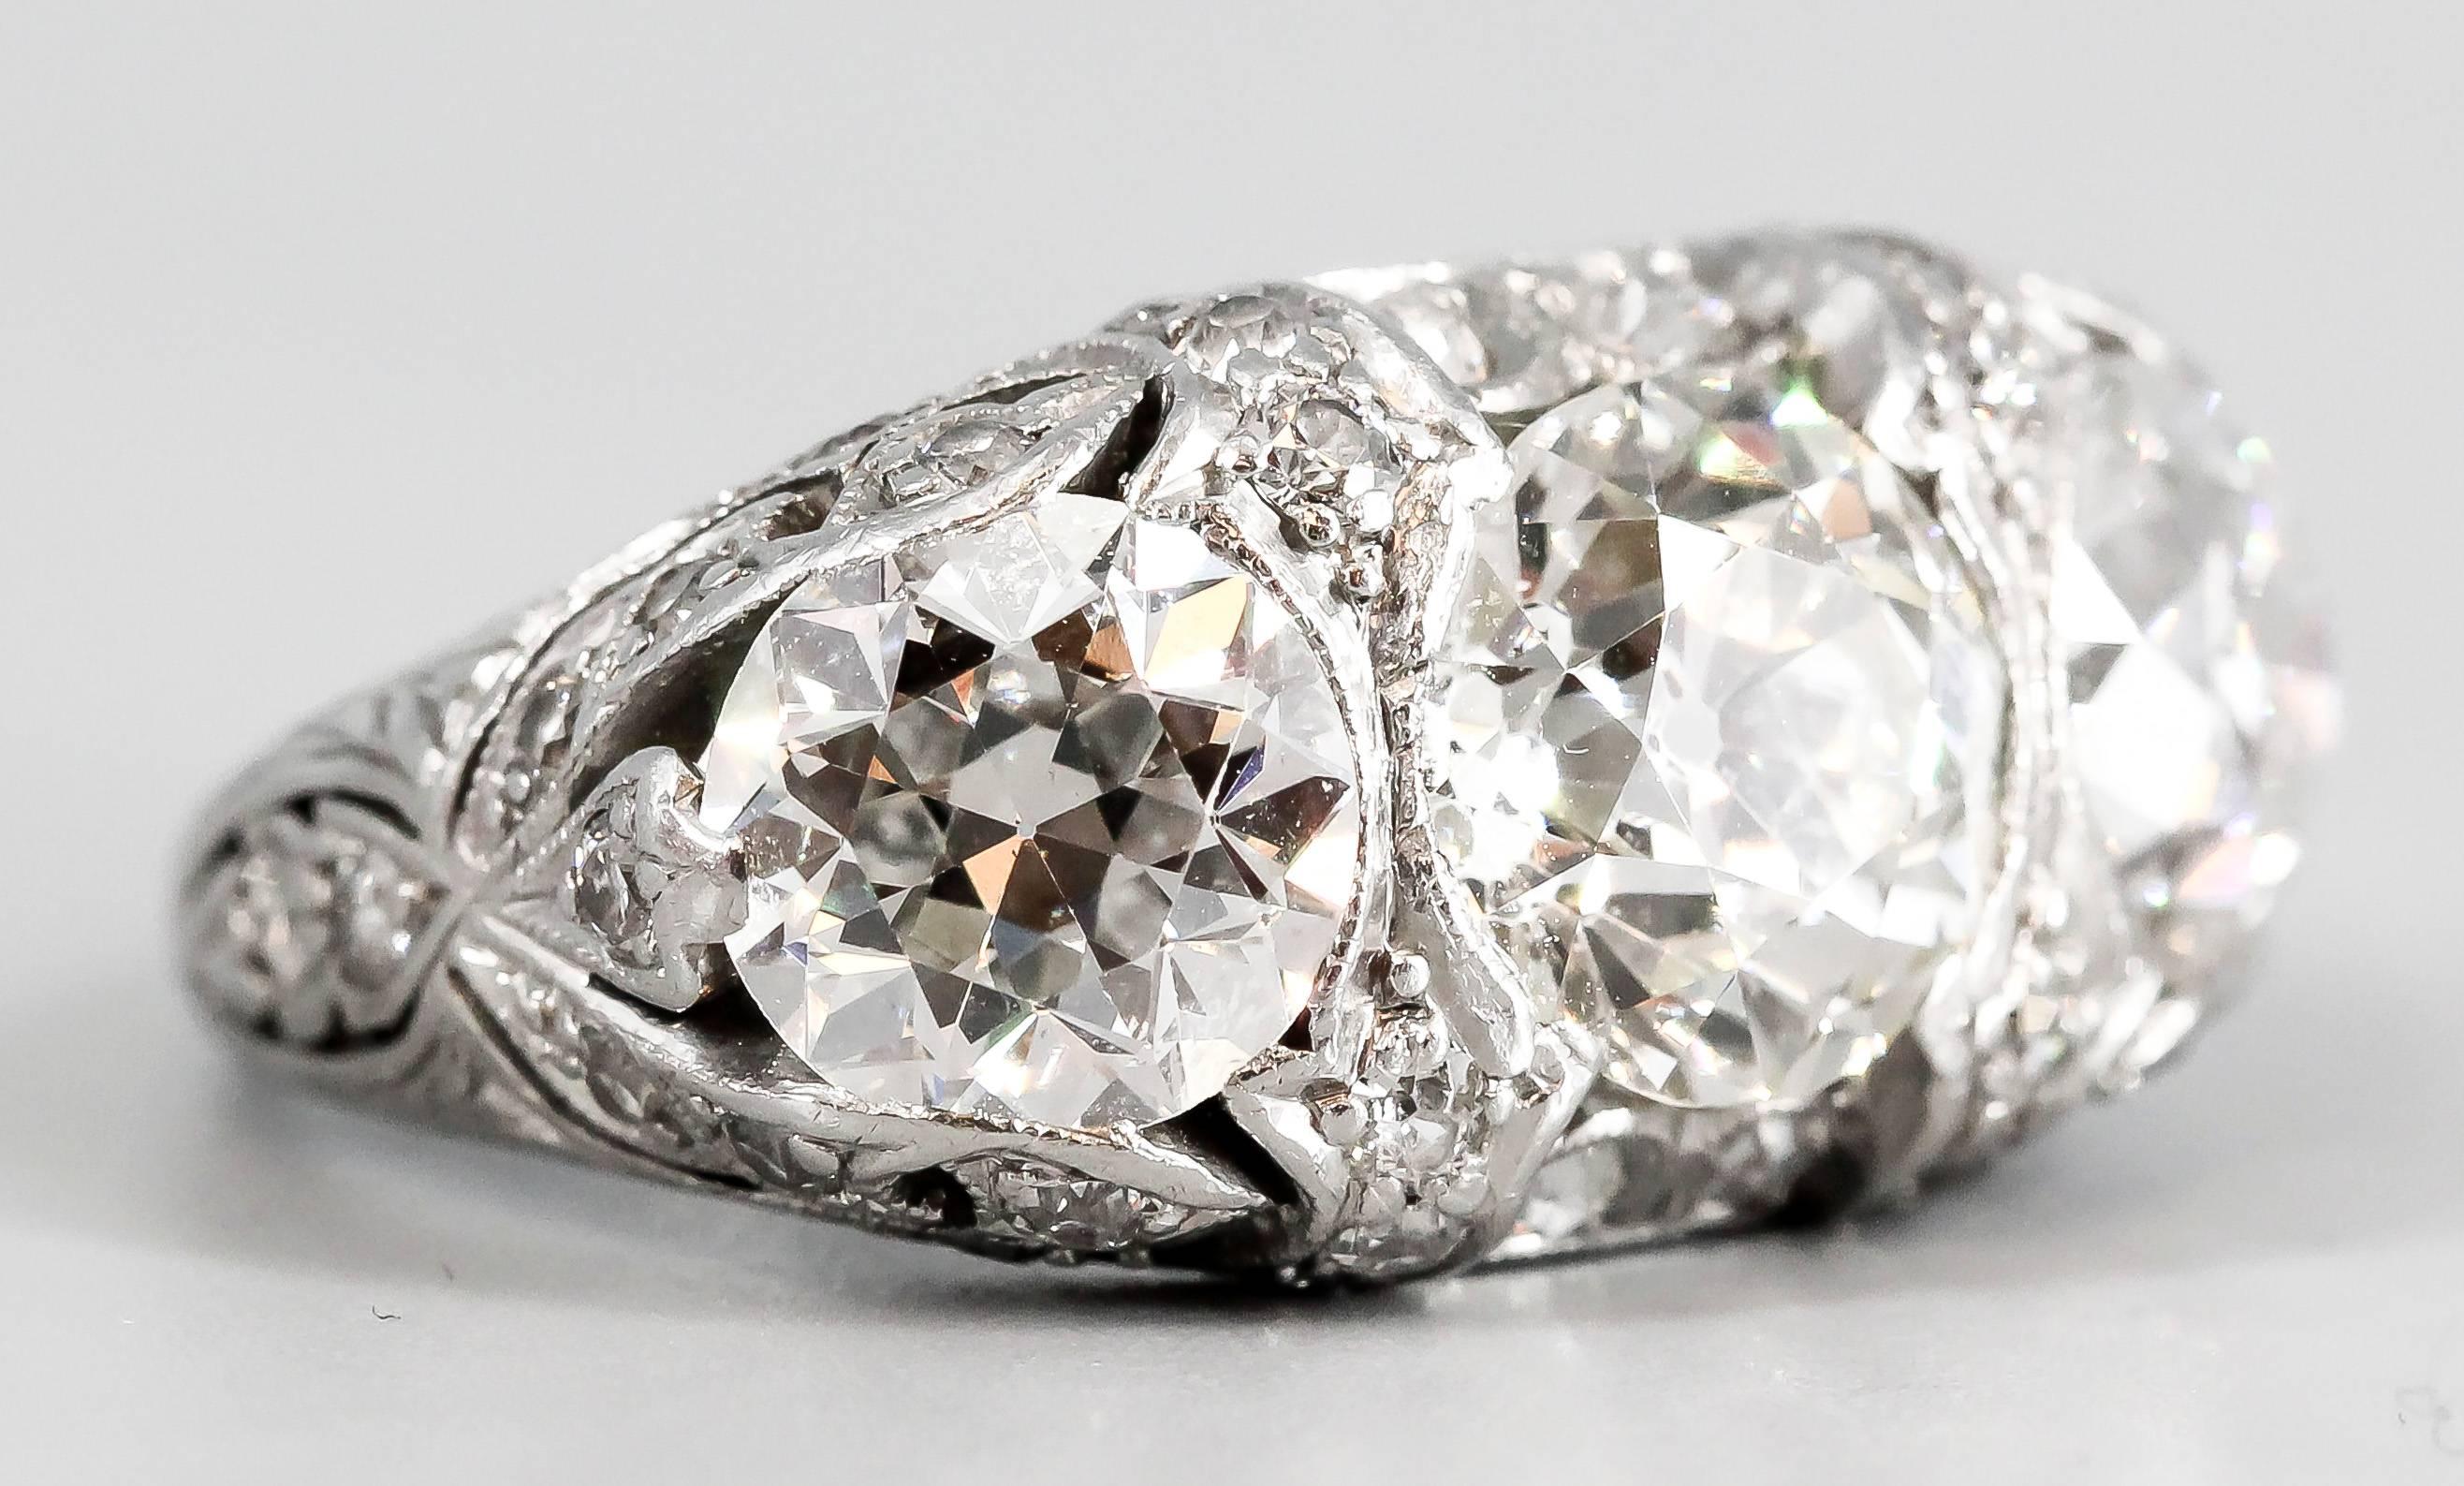 Impressive Art Deco diamond and platinum 3 stone ring, circa 1920s. It features high grade round European cut diamonds. Central stone is approx. 2.0cts, with side stones approx. 1.5cts total weight, along with smaller diamonds complementing them.